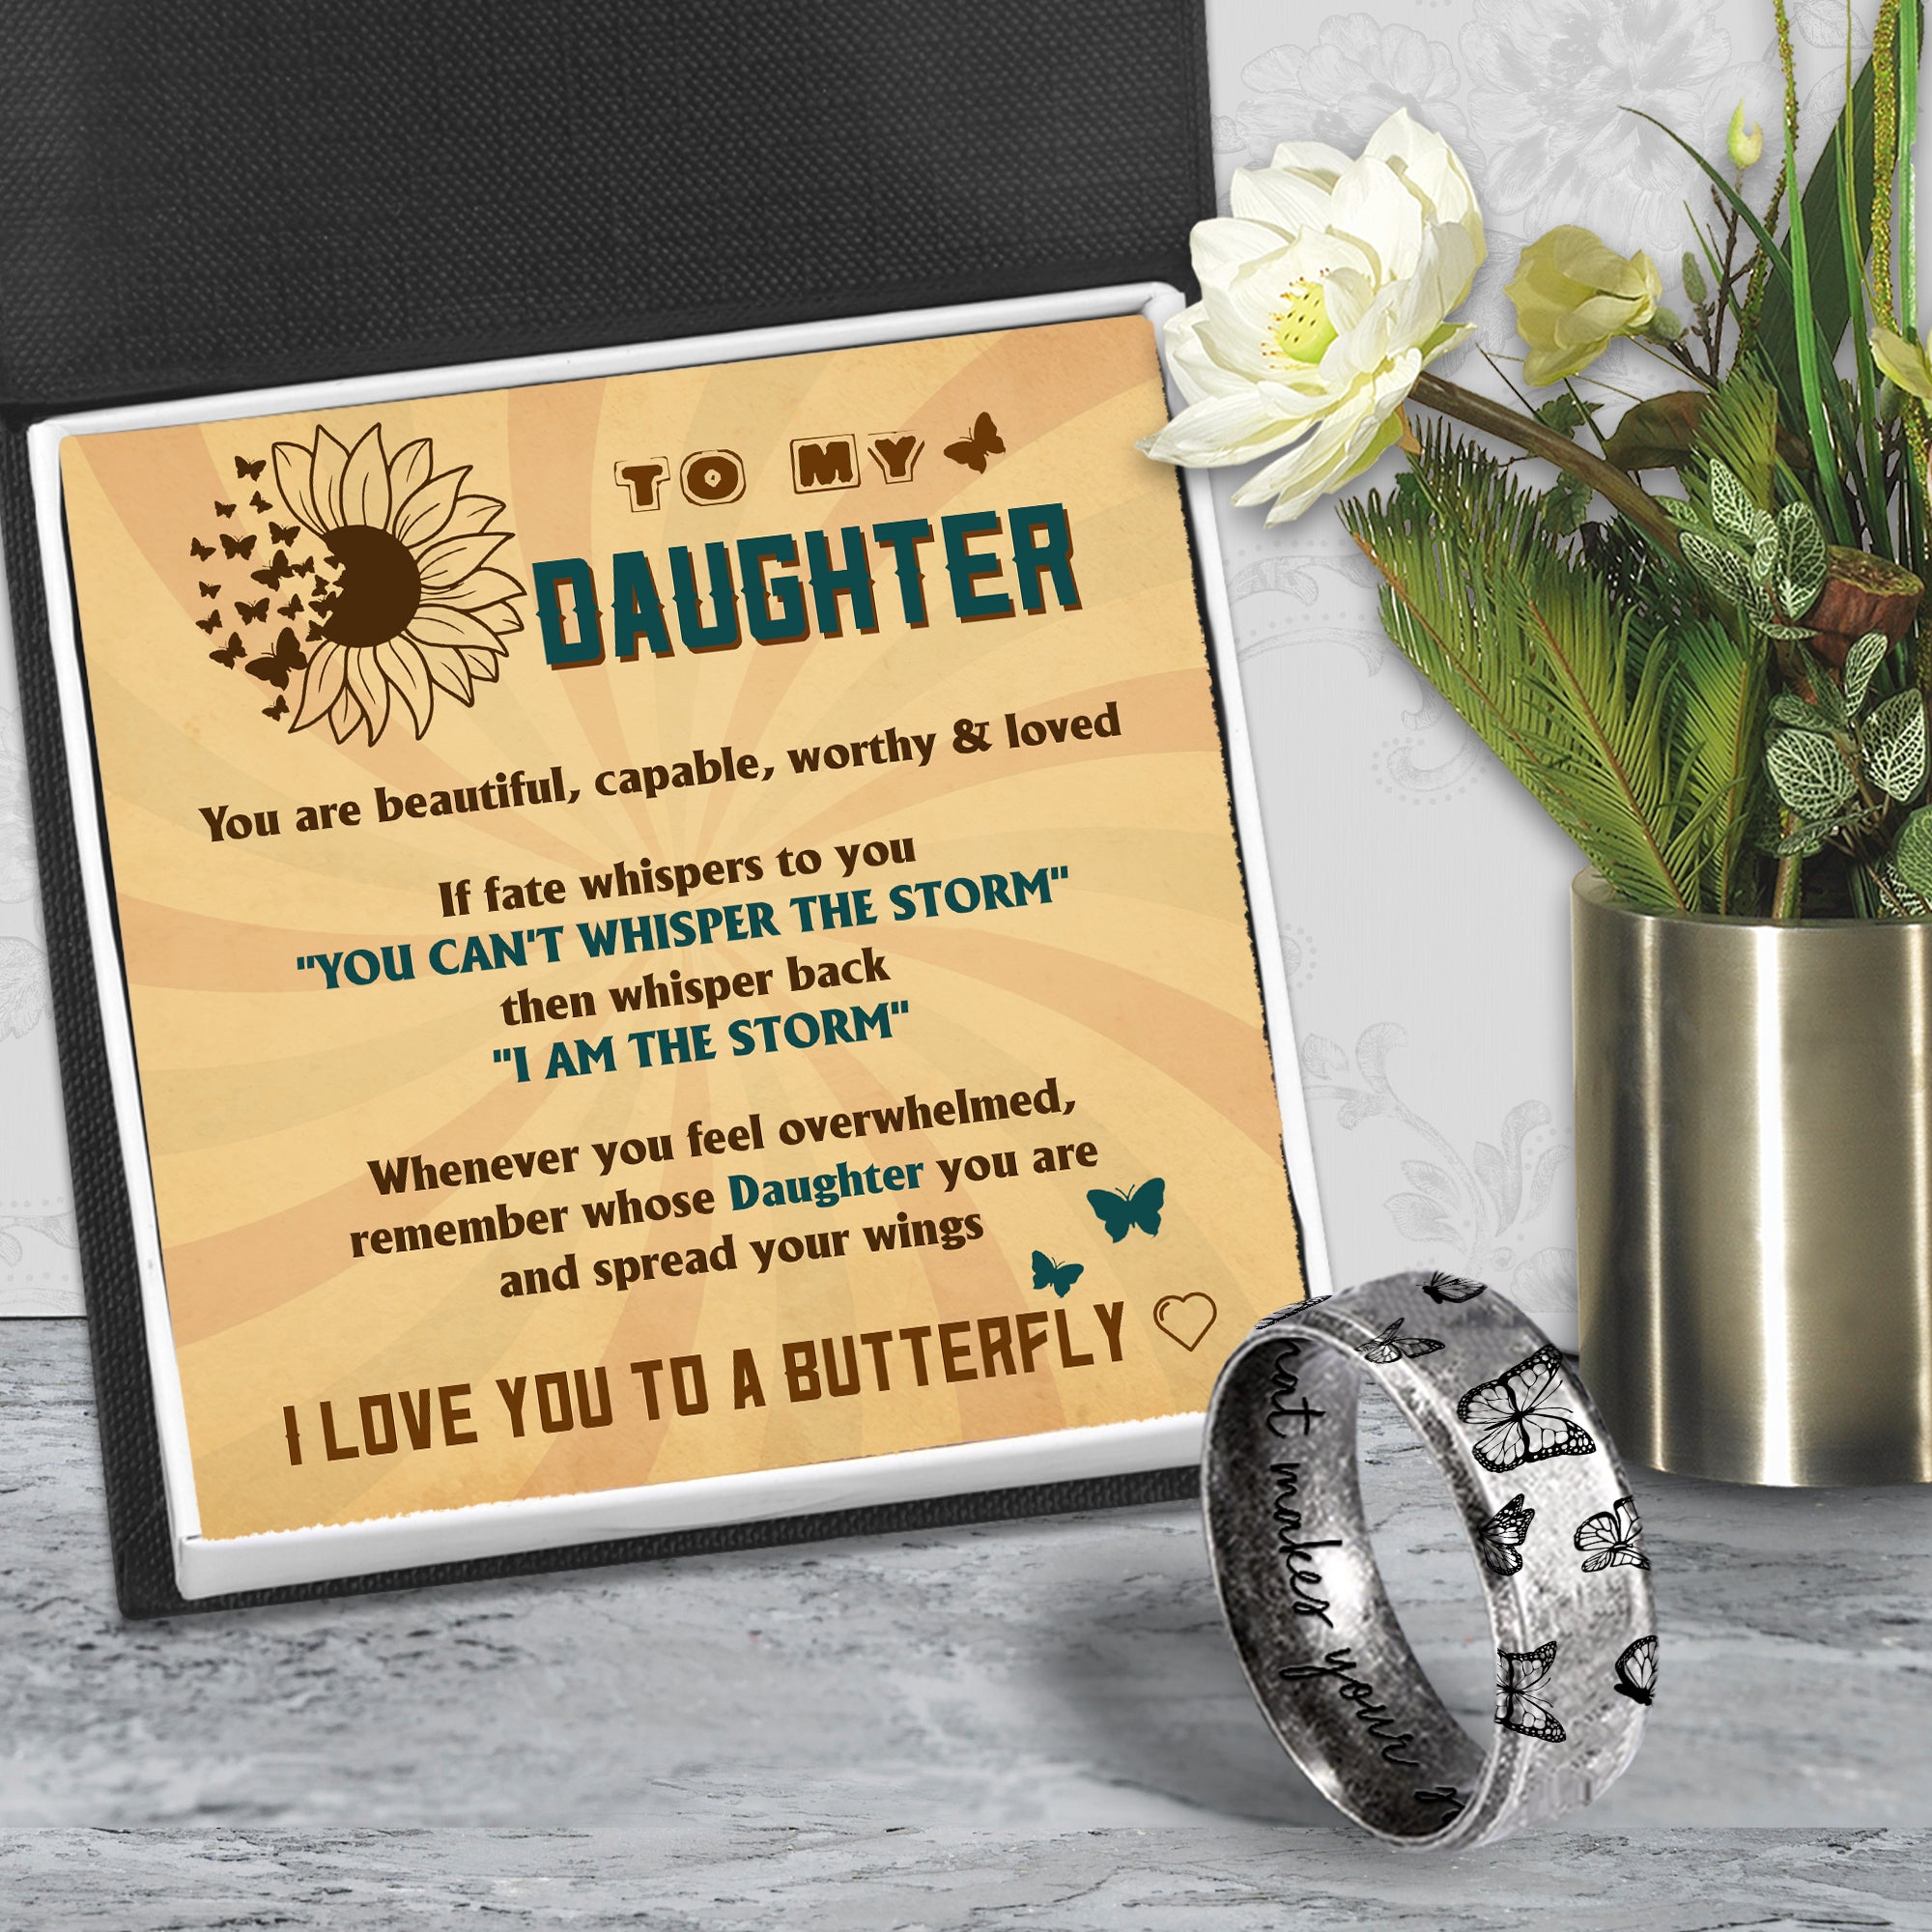 Metal Butterfly Ring - Butterfly - To My Daughter - I Love You To A Butterfly - Ukgri17002